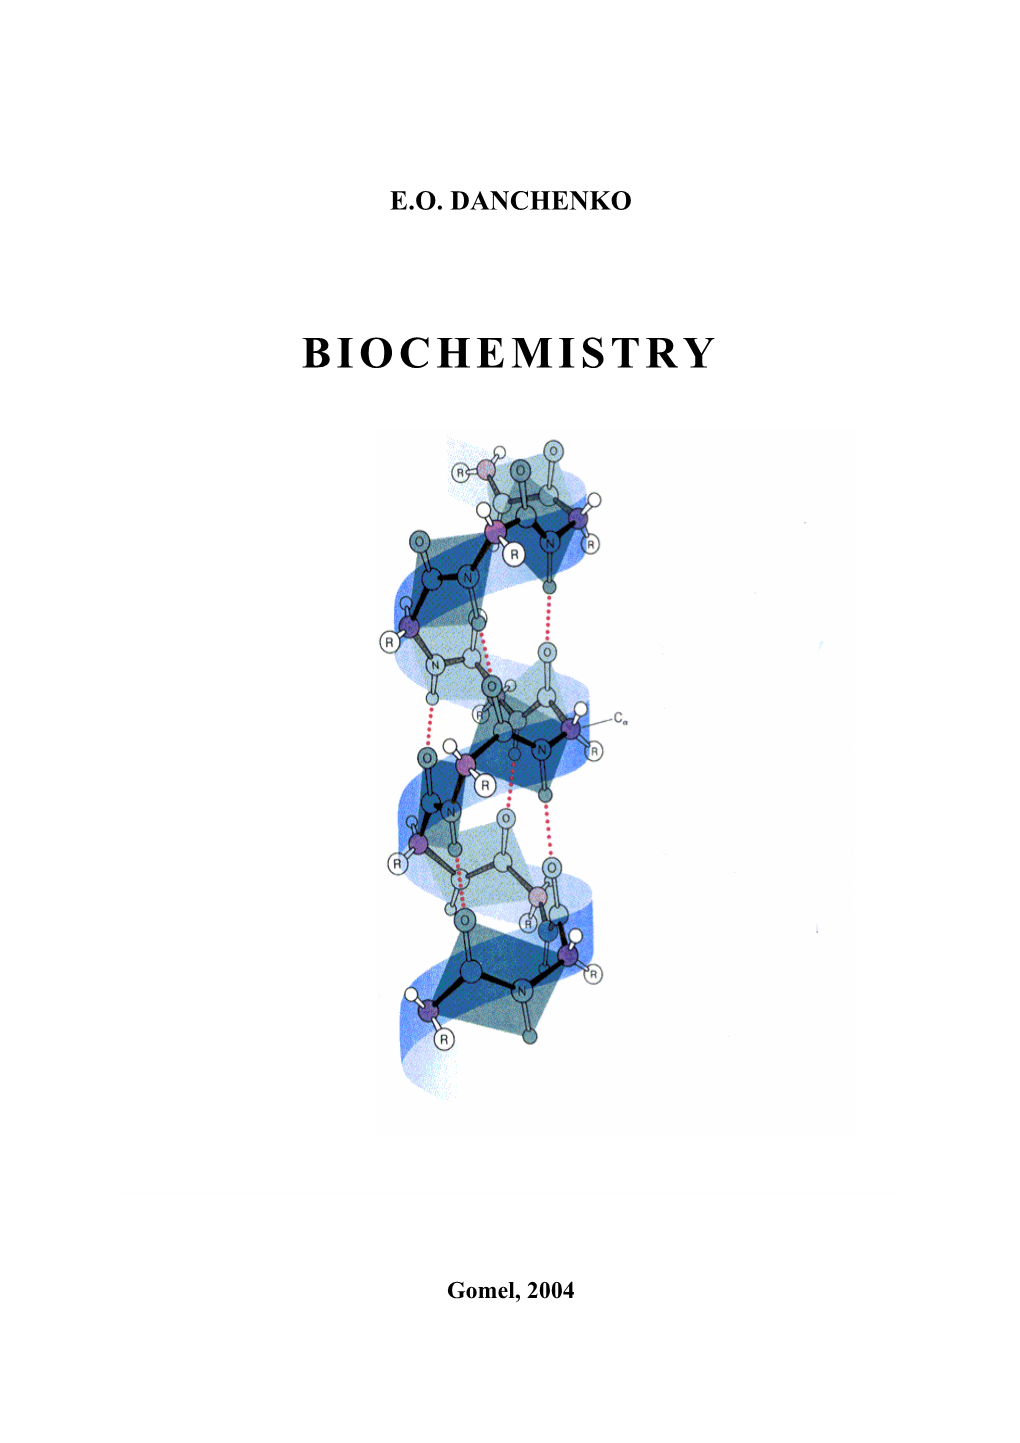 Lecture 1 Introduction to Biochemistry